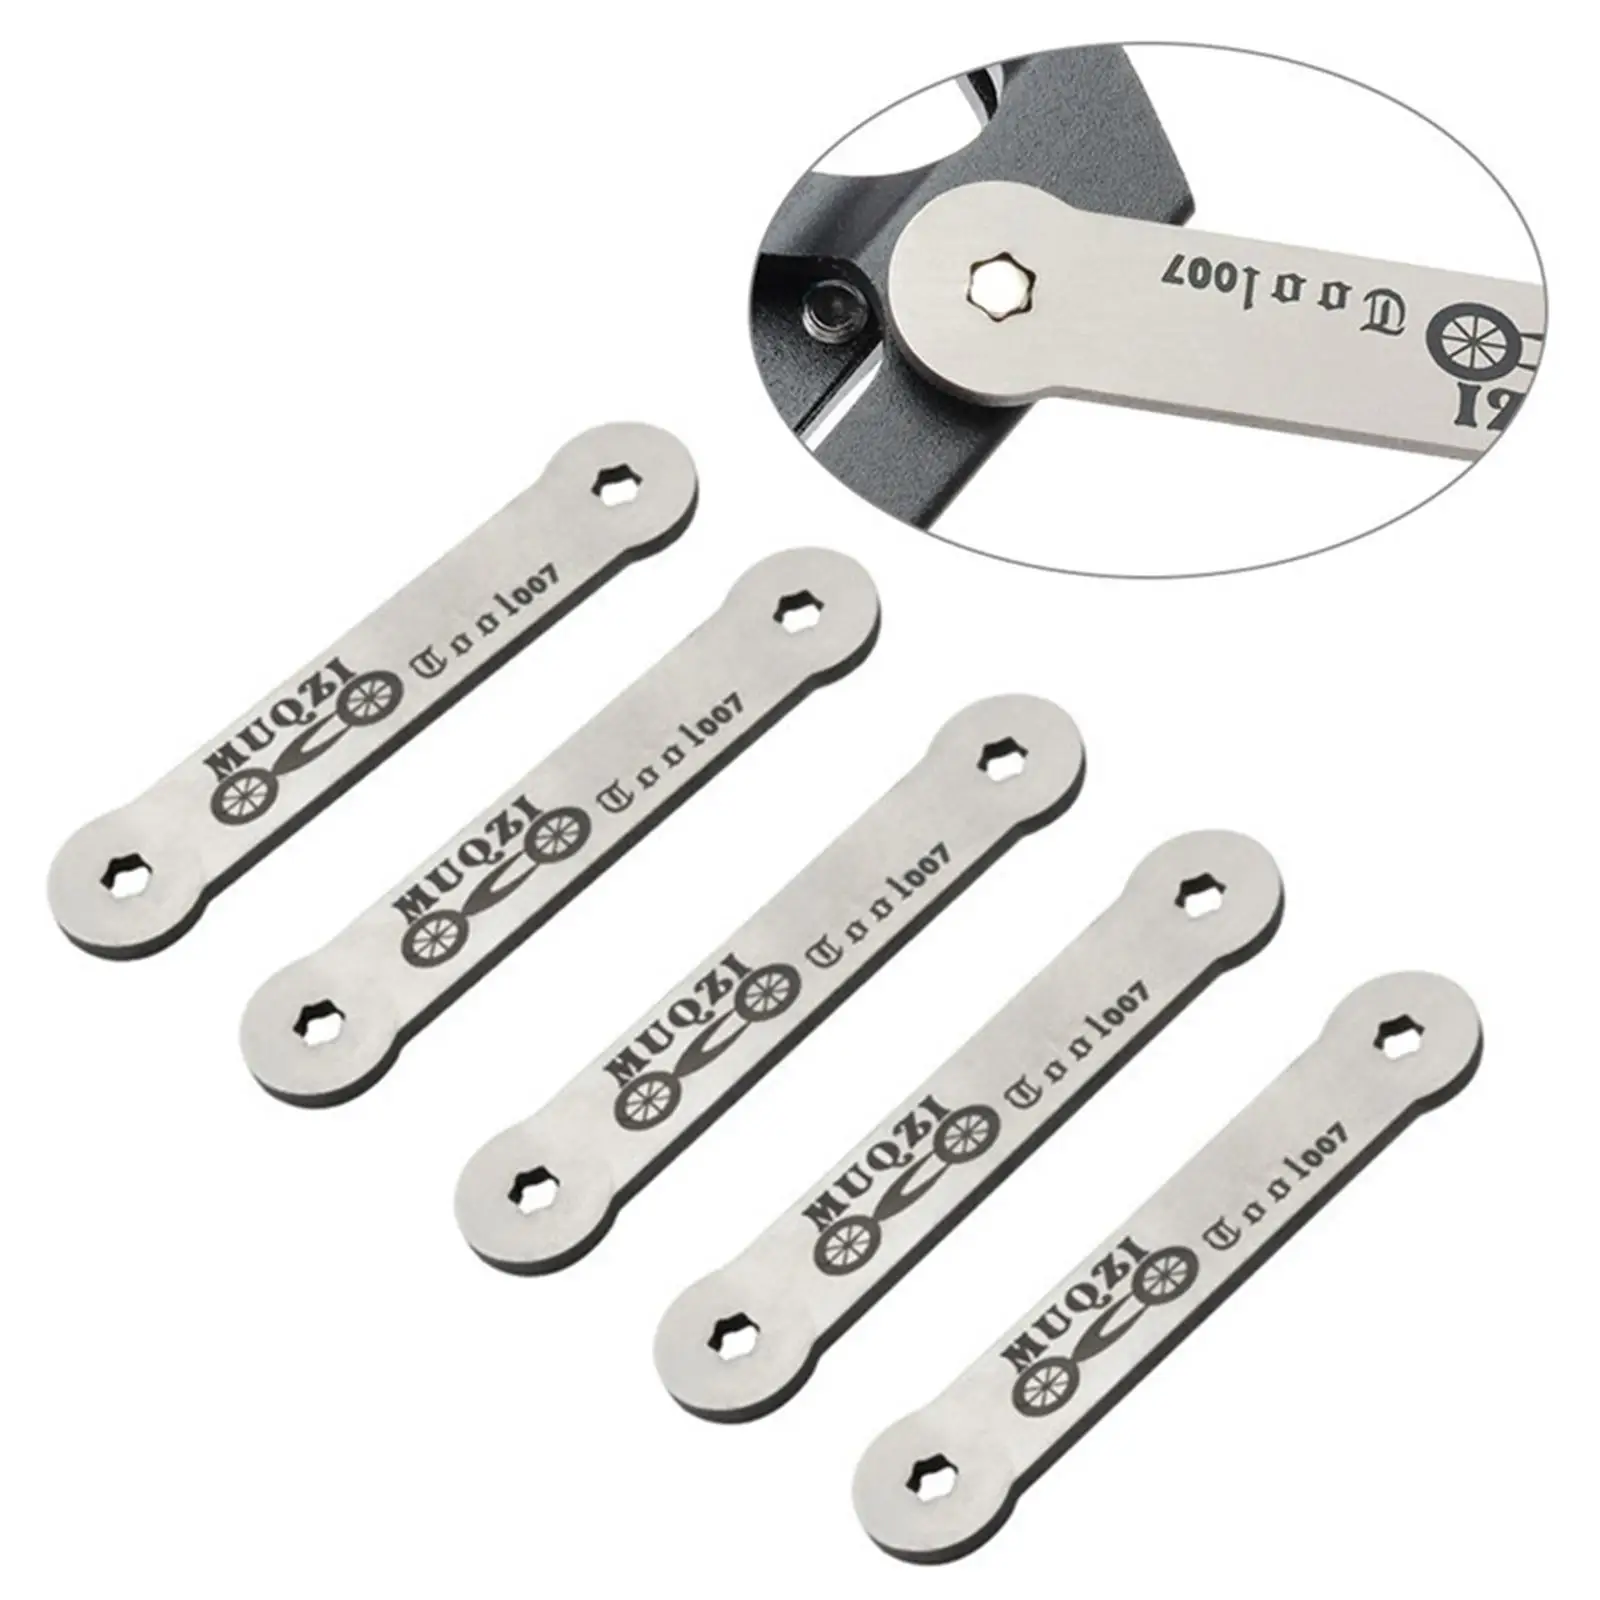 5 x Pedal Wrench Anti-Rust Removal Tool High-Quality for Repair Cycling Bike